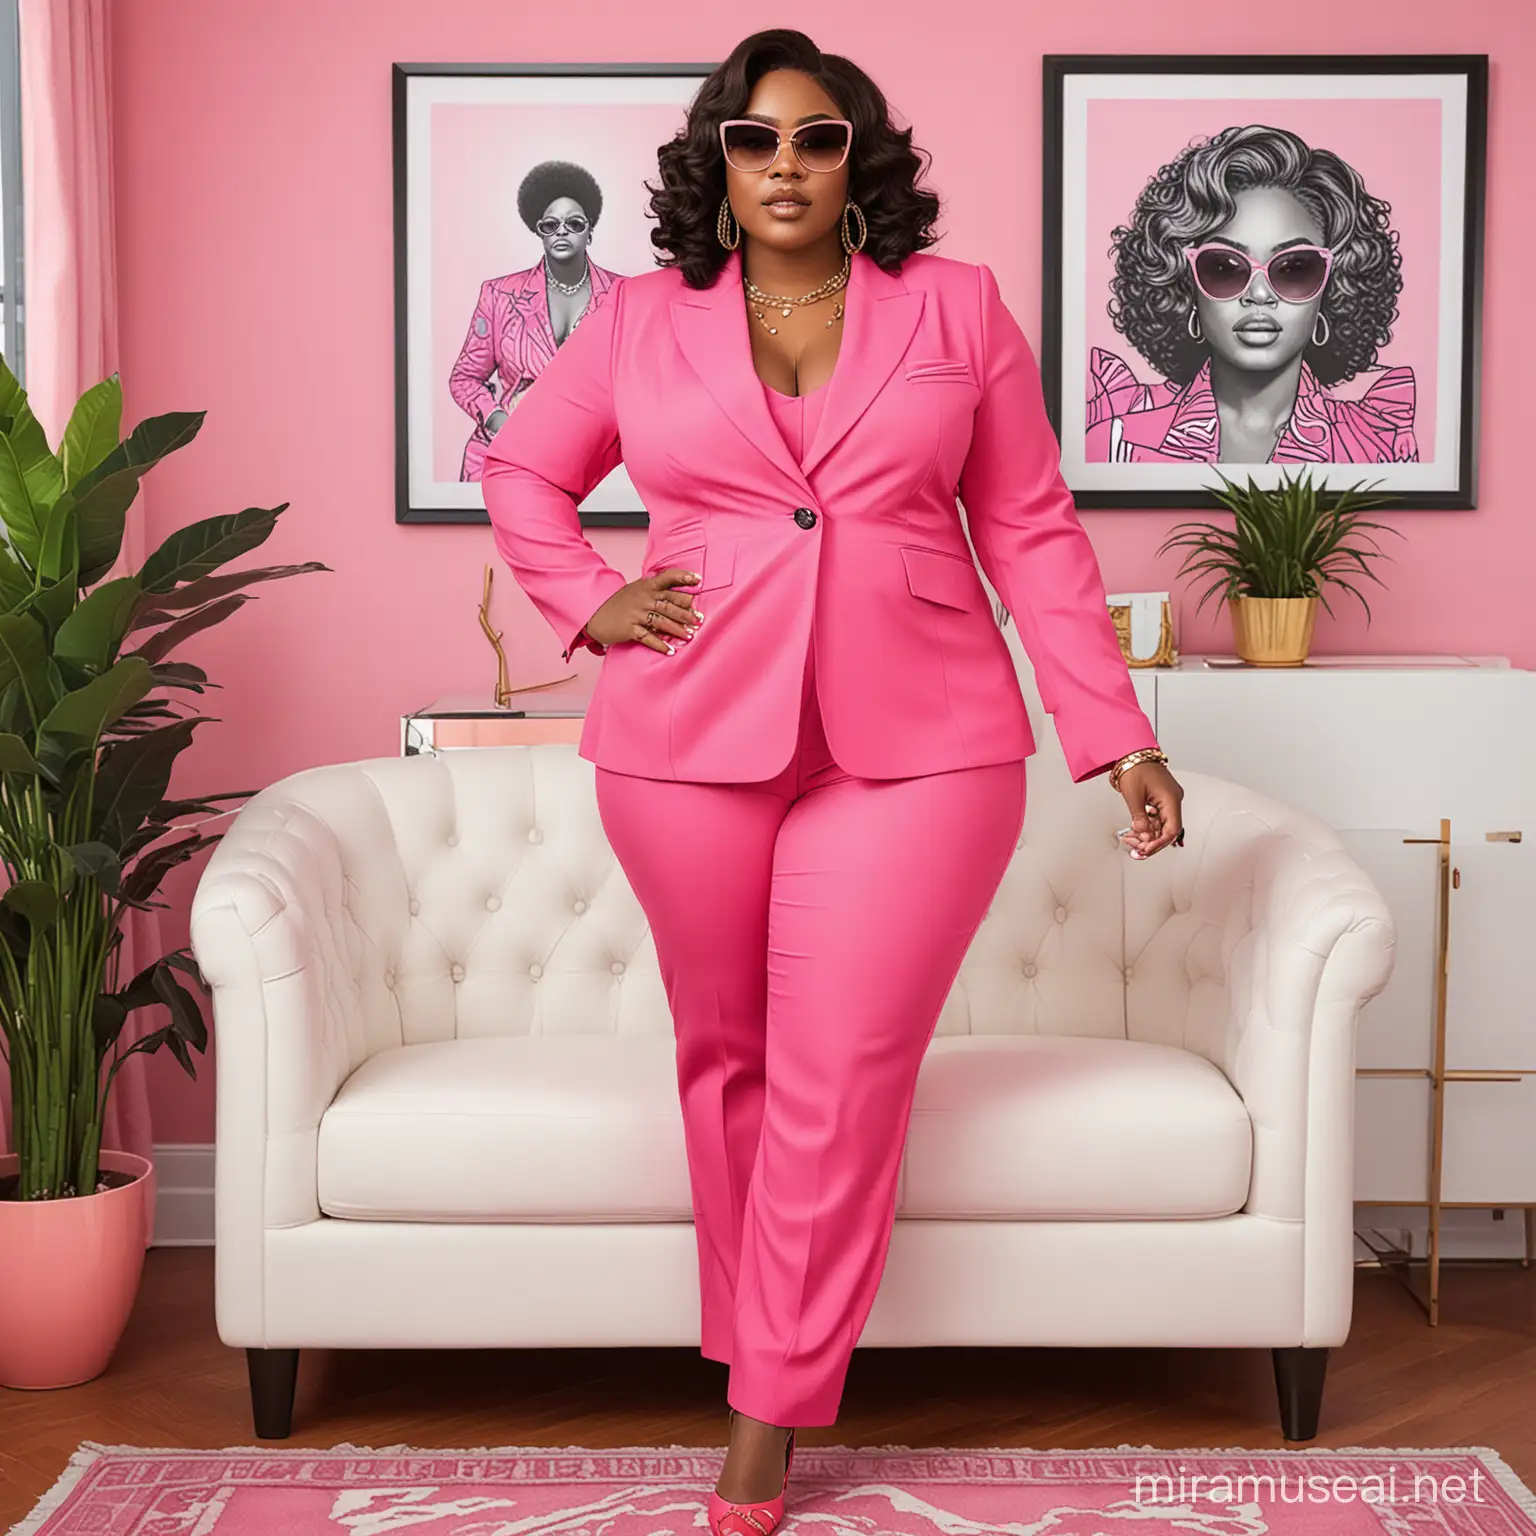 Coloring page with white interior with an plus sized African American woman in a bold and vibrant pantsuit with pink shades, reflecting the resurgence of power dressing and bold color choices in modern fashion.